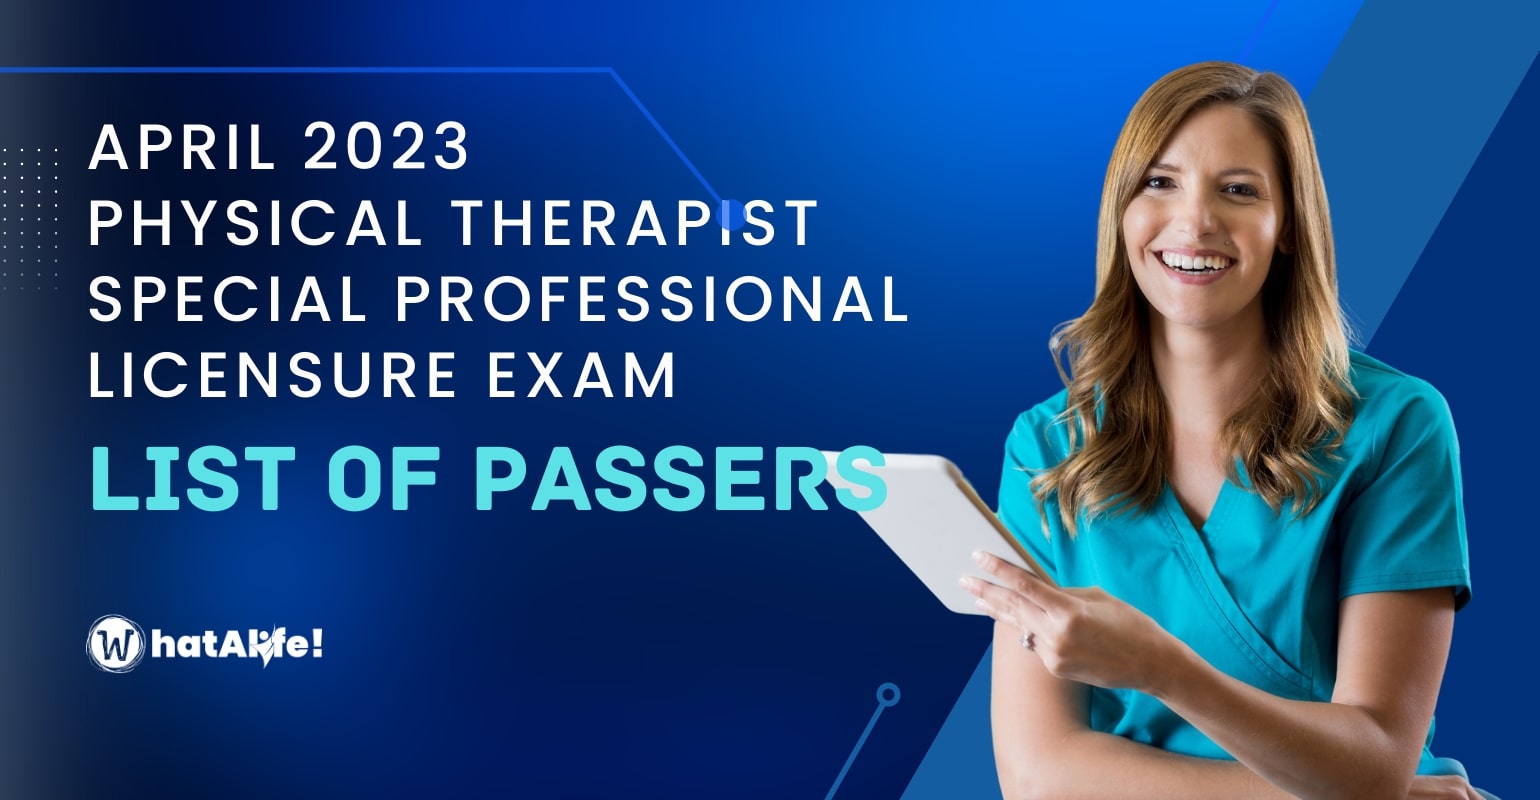 Full List of Passers — April 2023 Physical Therapist Special Professional Licensure Exam Results